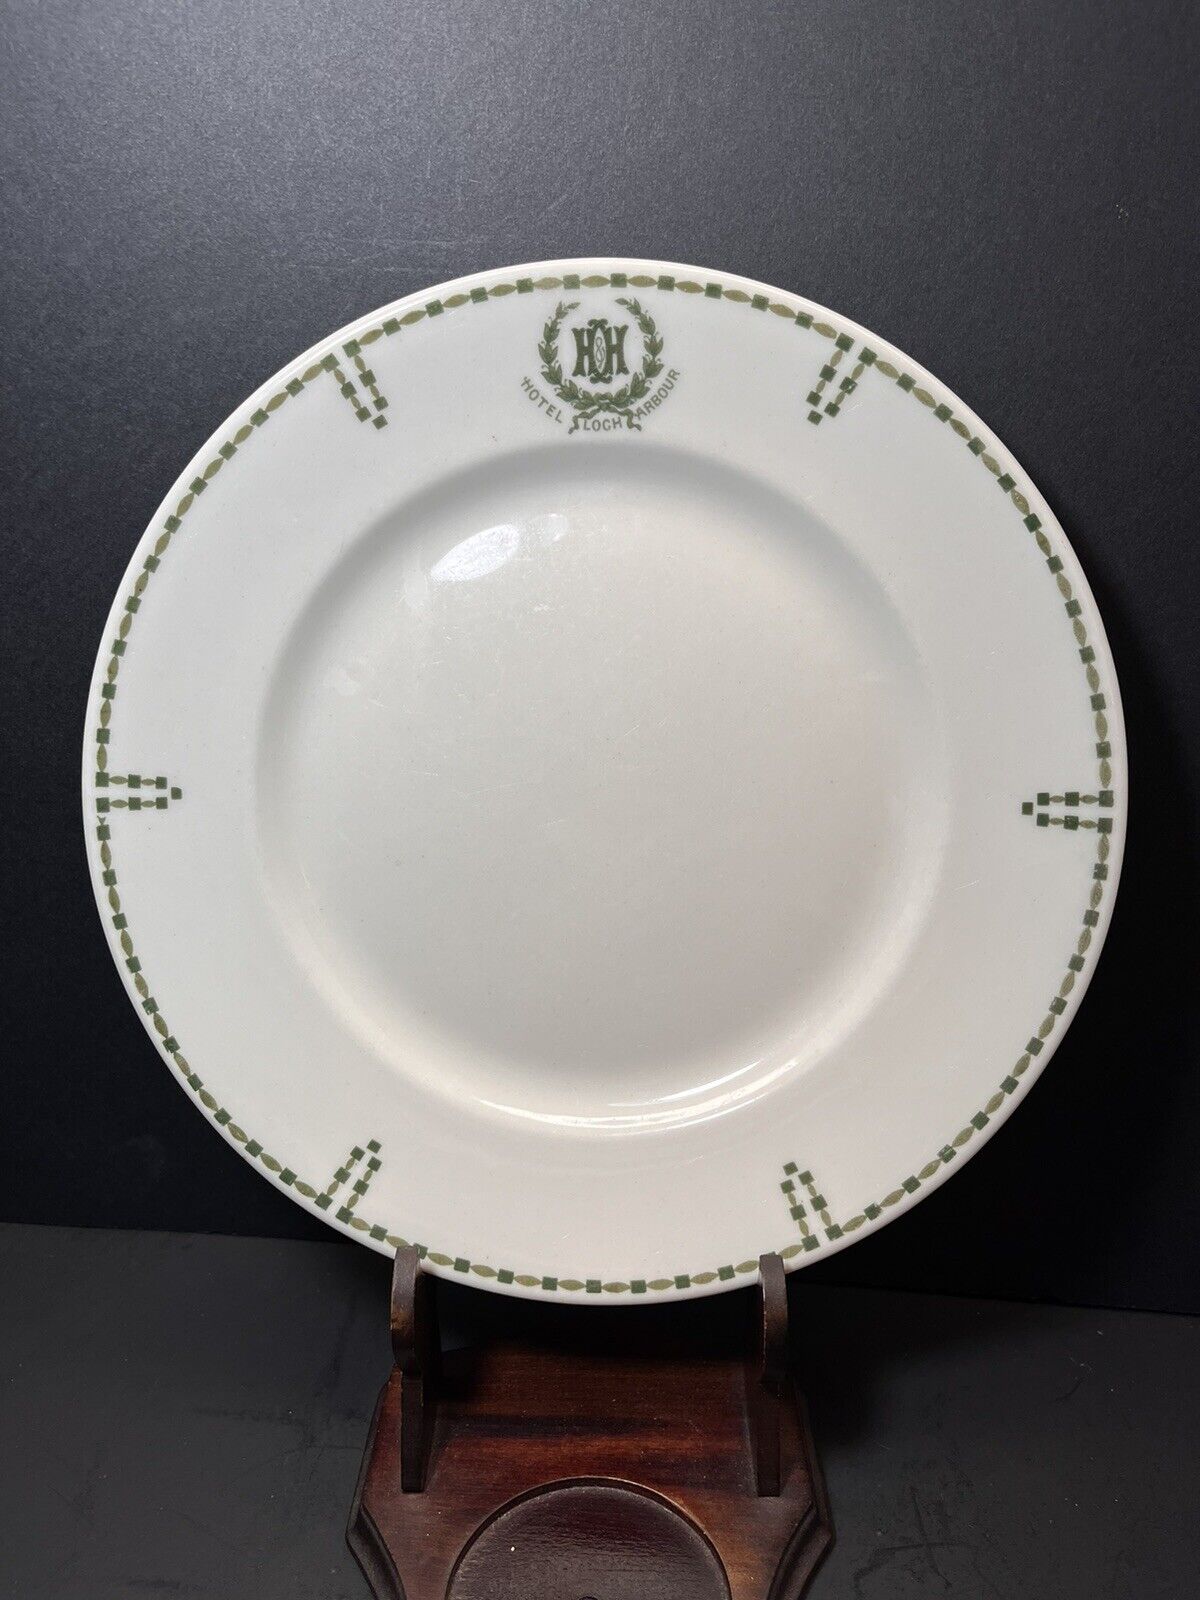 HOTEL LOCH ARBOUR Vintage Restaurant Plate NJ ~ Maddock's American China